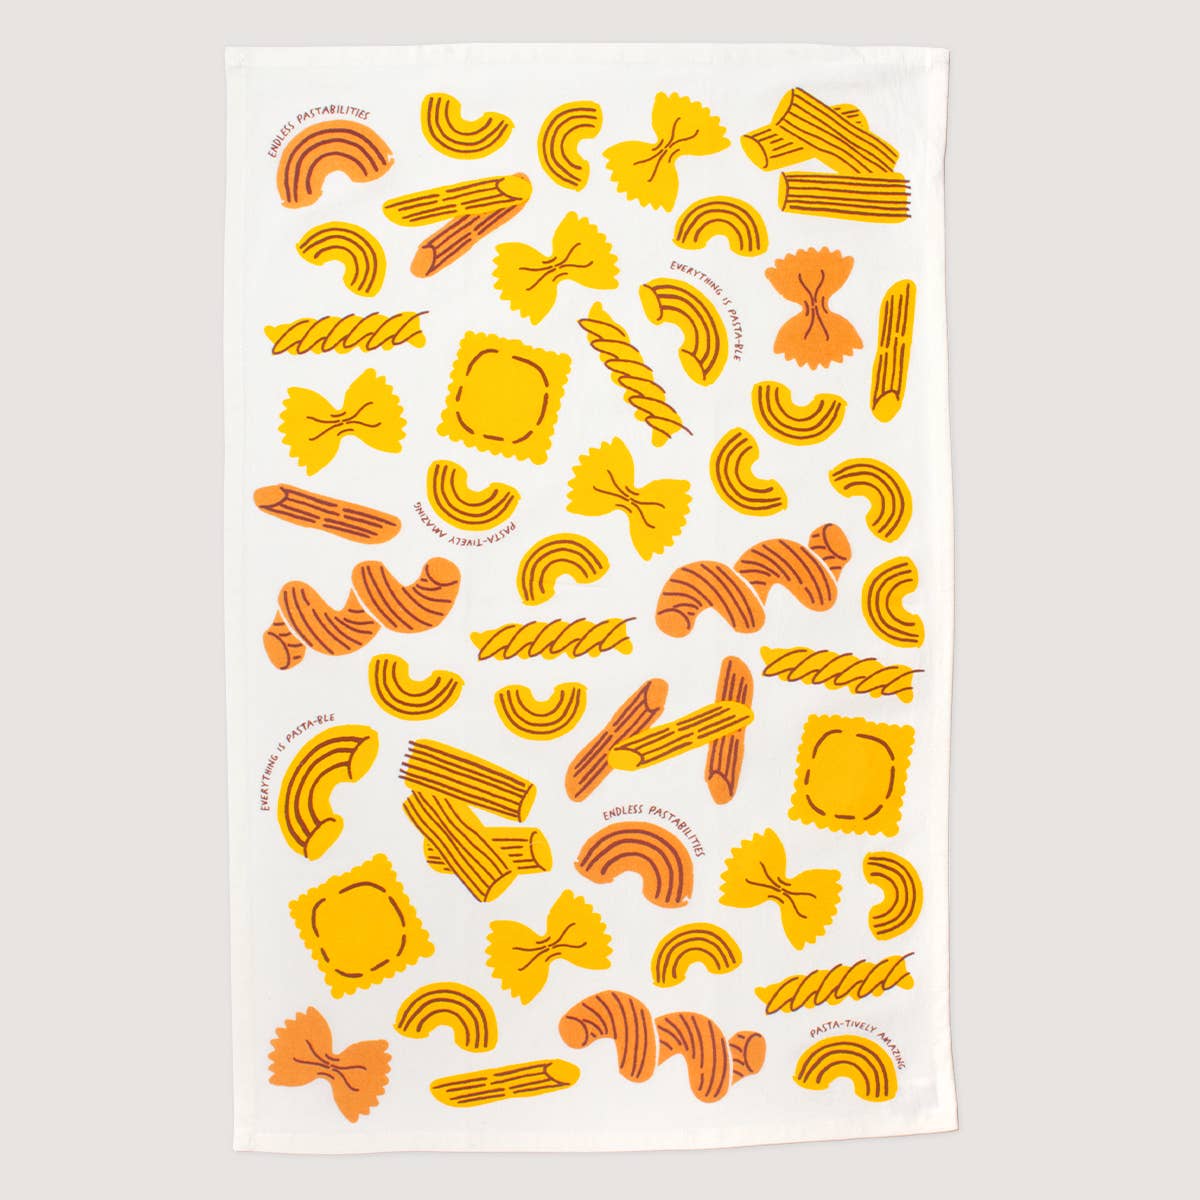 Kitchen towel with assorted pasta shapes and pasta puns which include "endless pastabilities", "everthing is pastable", and "pasta-tively amazing".